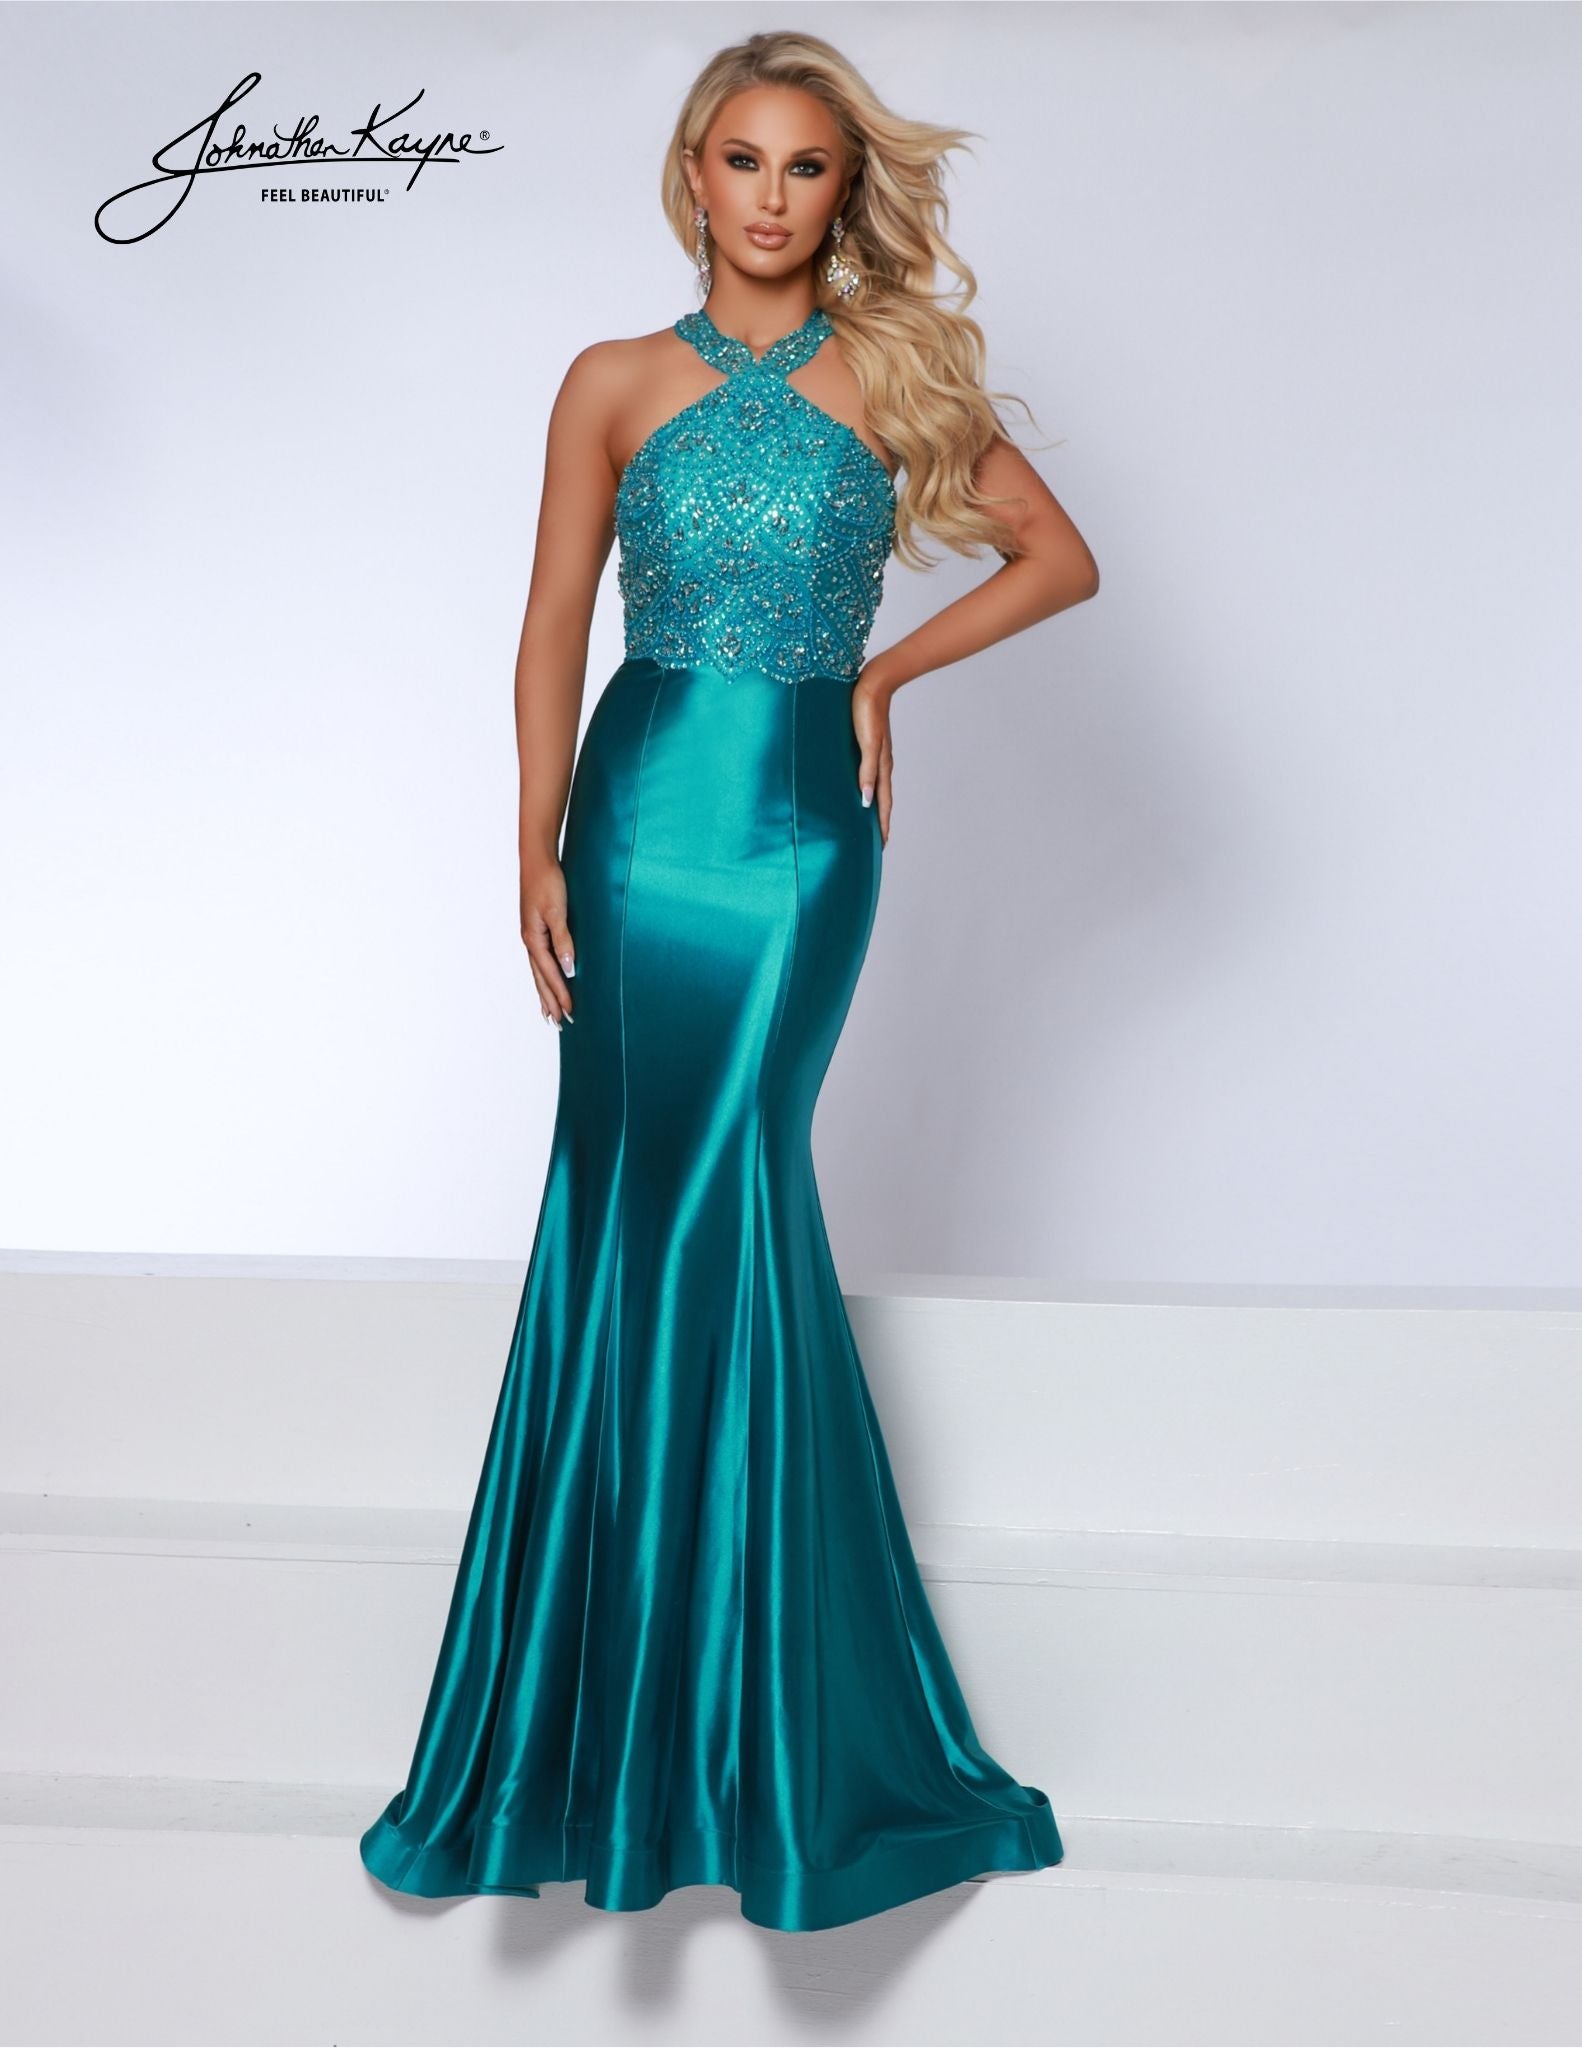 Johnathan Kayne 2839 Long Prom Dress is a stunning formal gown crafted with exquisite beadwork. Showcasing a halter neckline and an open back, it's a glamorous choice for prom or pageant. The mermaid silhouette creates a stunning look with every step. 